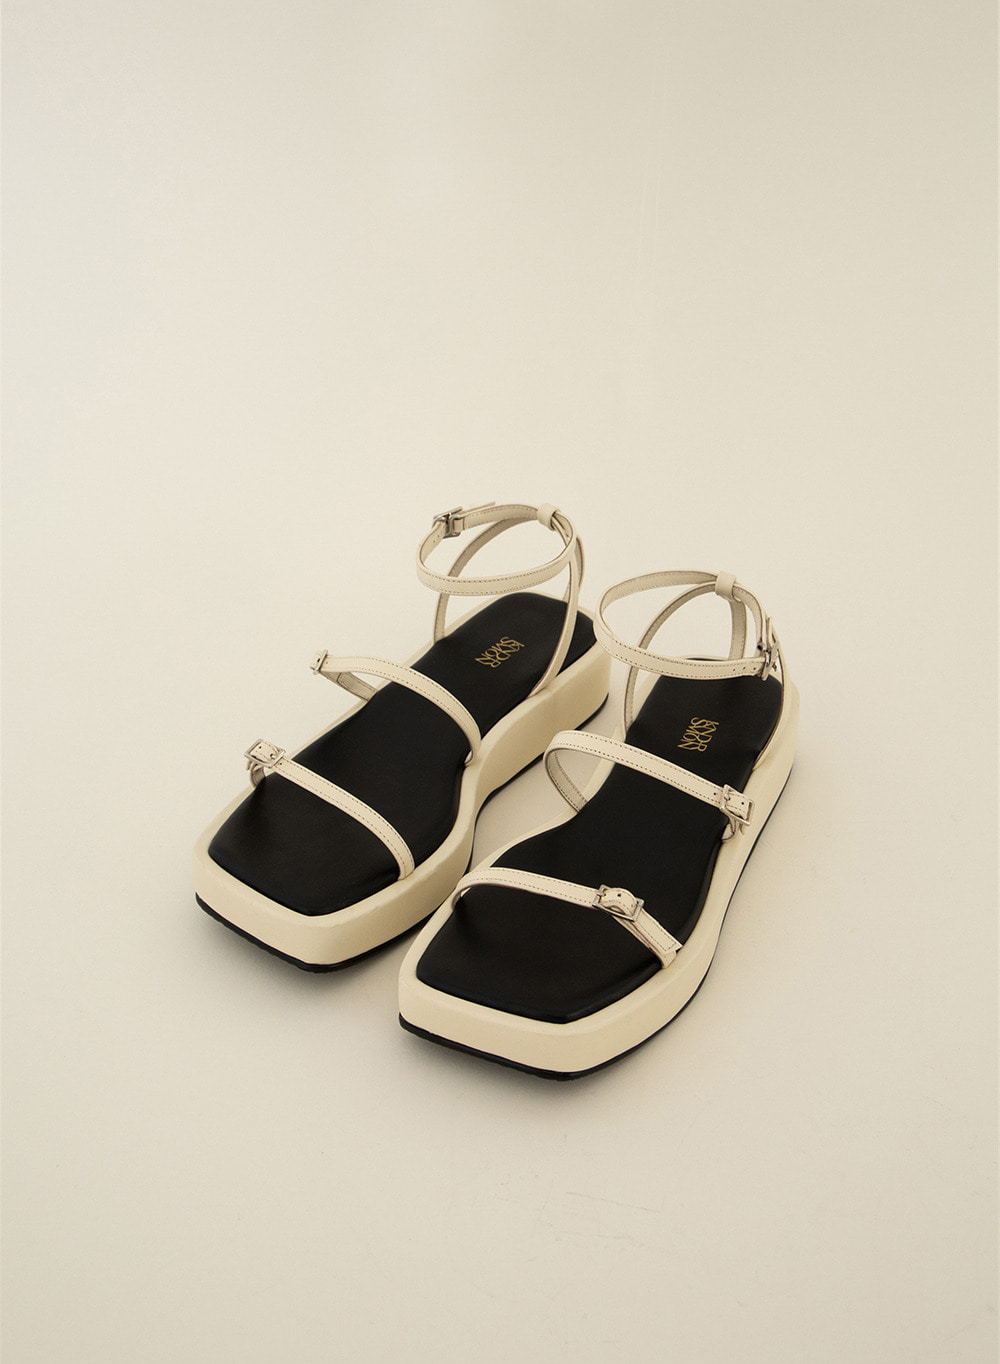 SS21 Leather Strap Wedge Sandals Cream